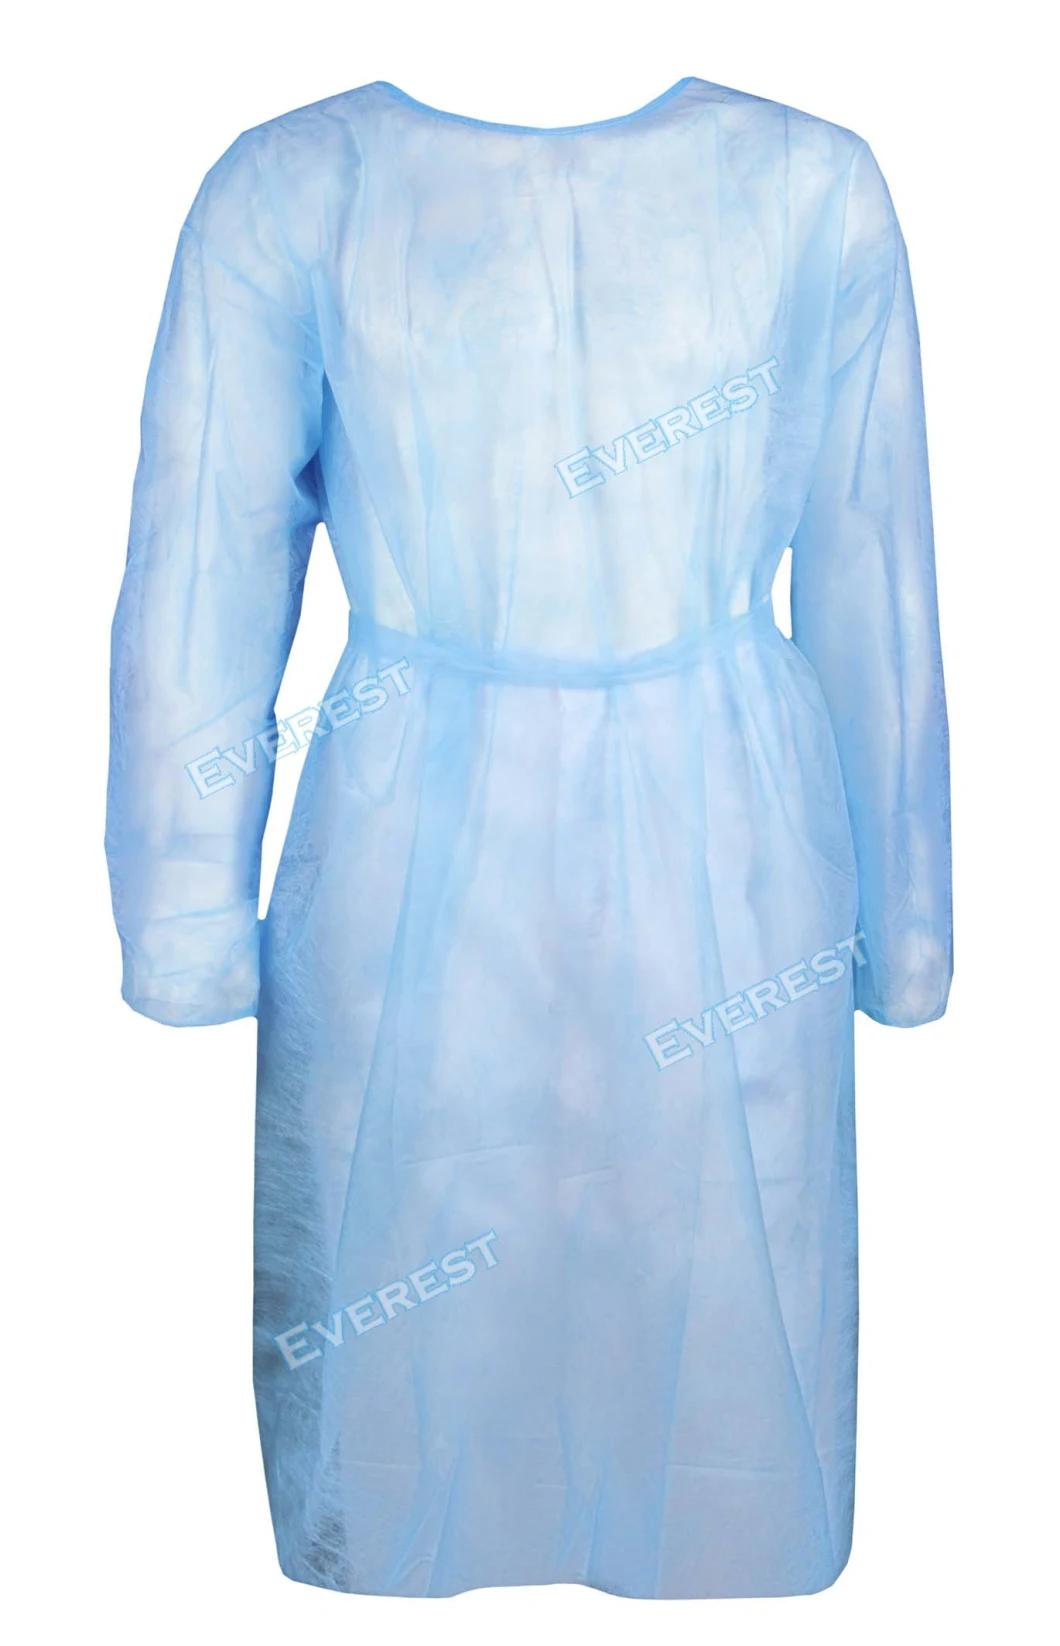 Disposable Non-Woven Isolation Gown for Medical Use